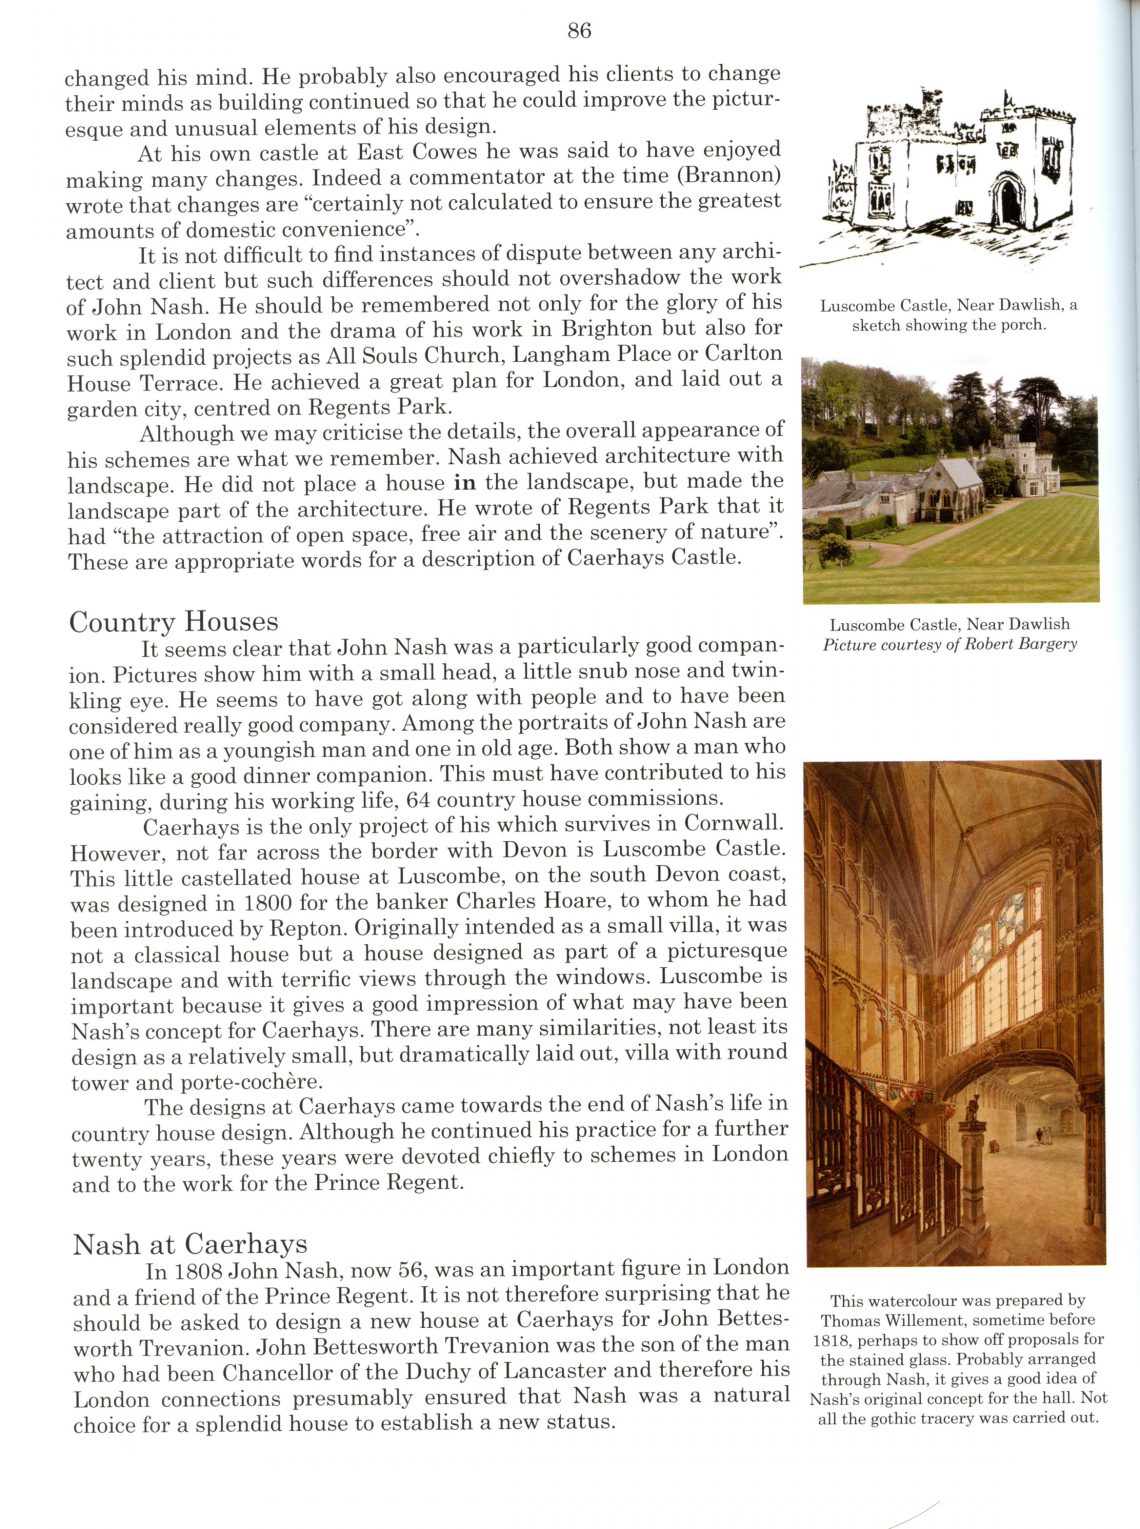 Caerhays-sample-pages058